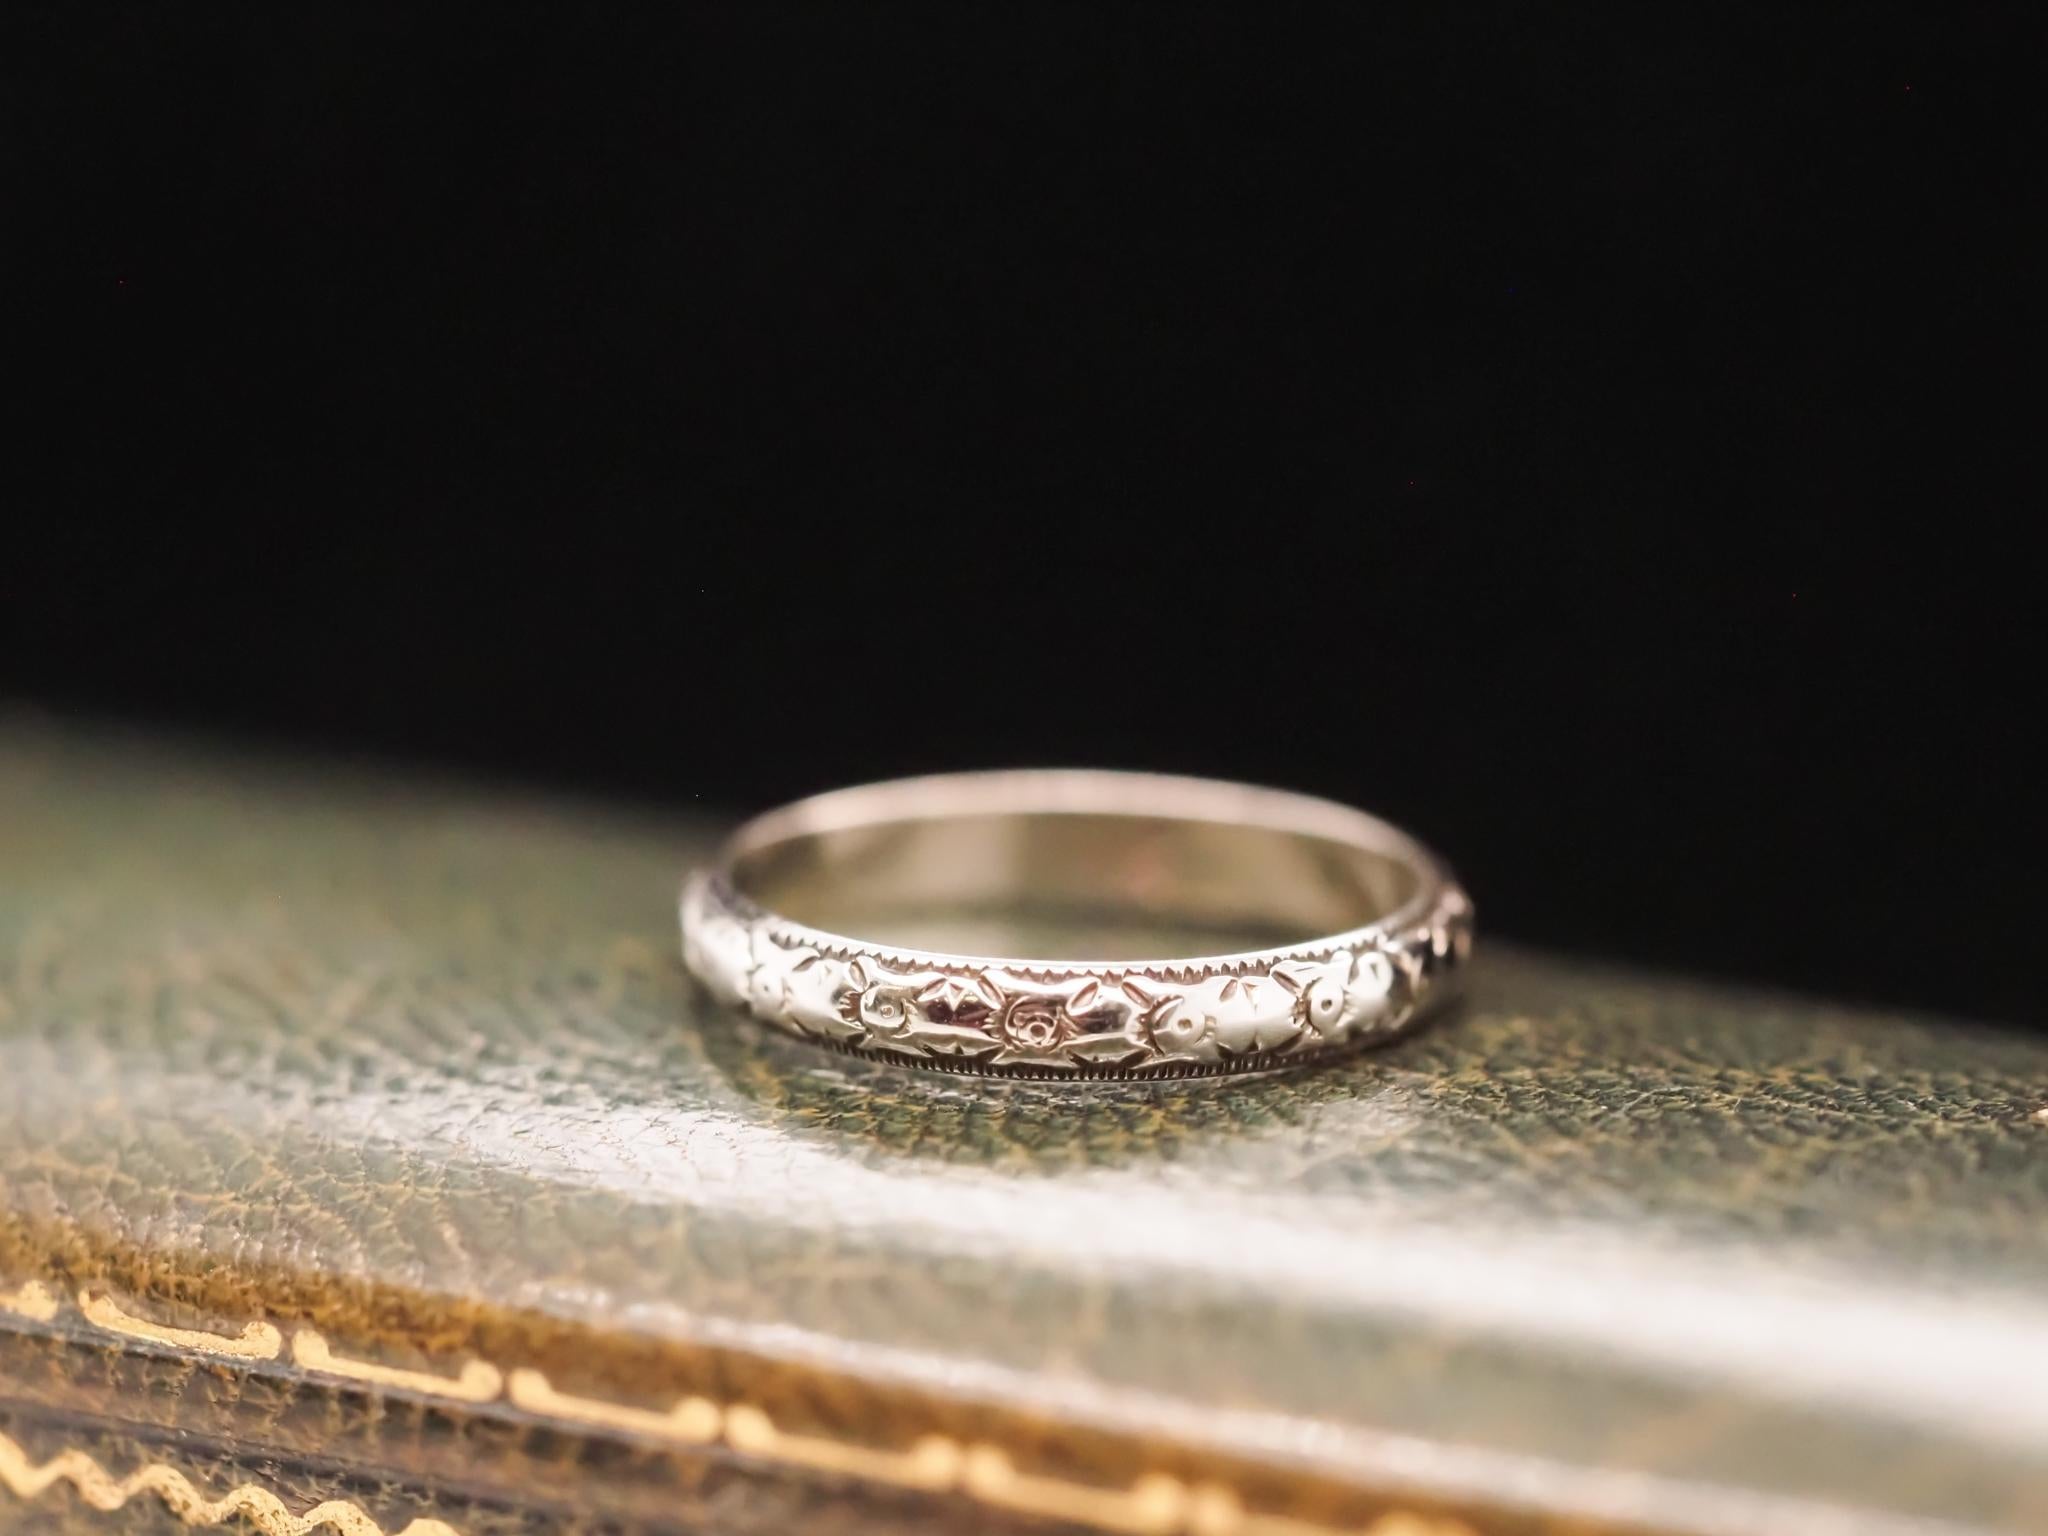 Vintage 18K White Gold Engraved Wedding Band In Good Condition For Sale In Atlanta, GA